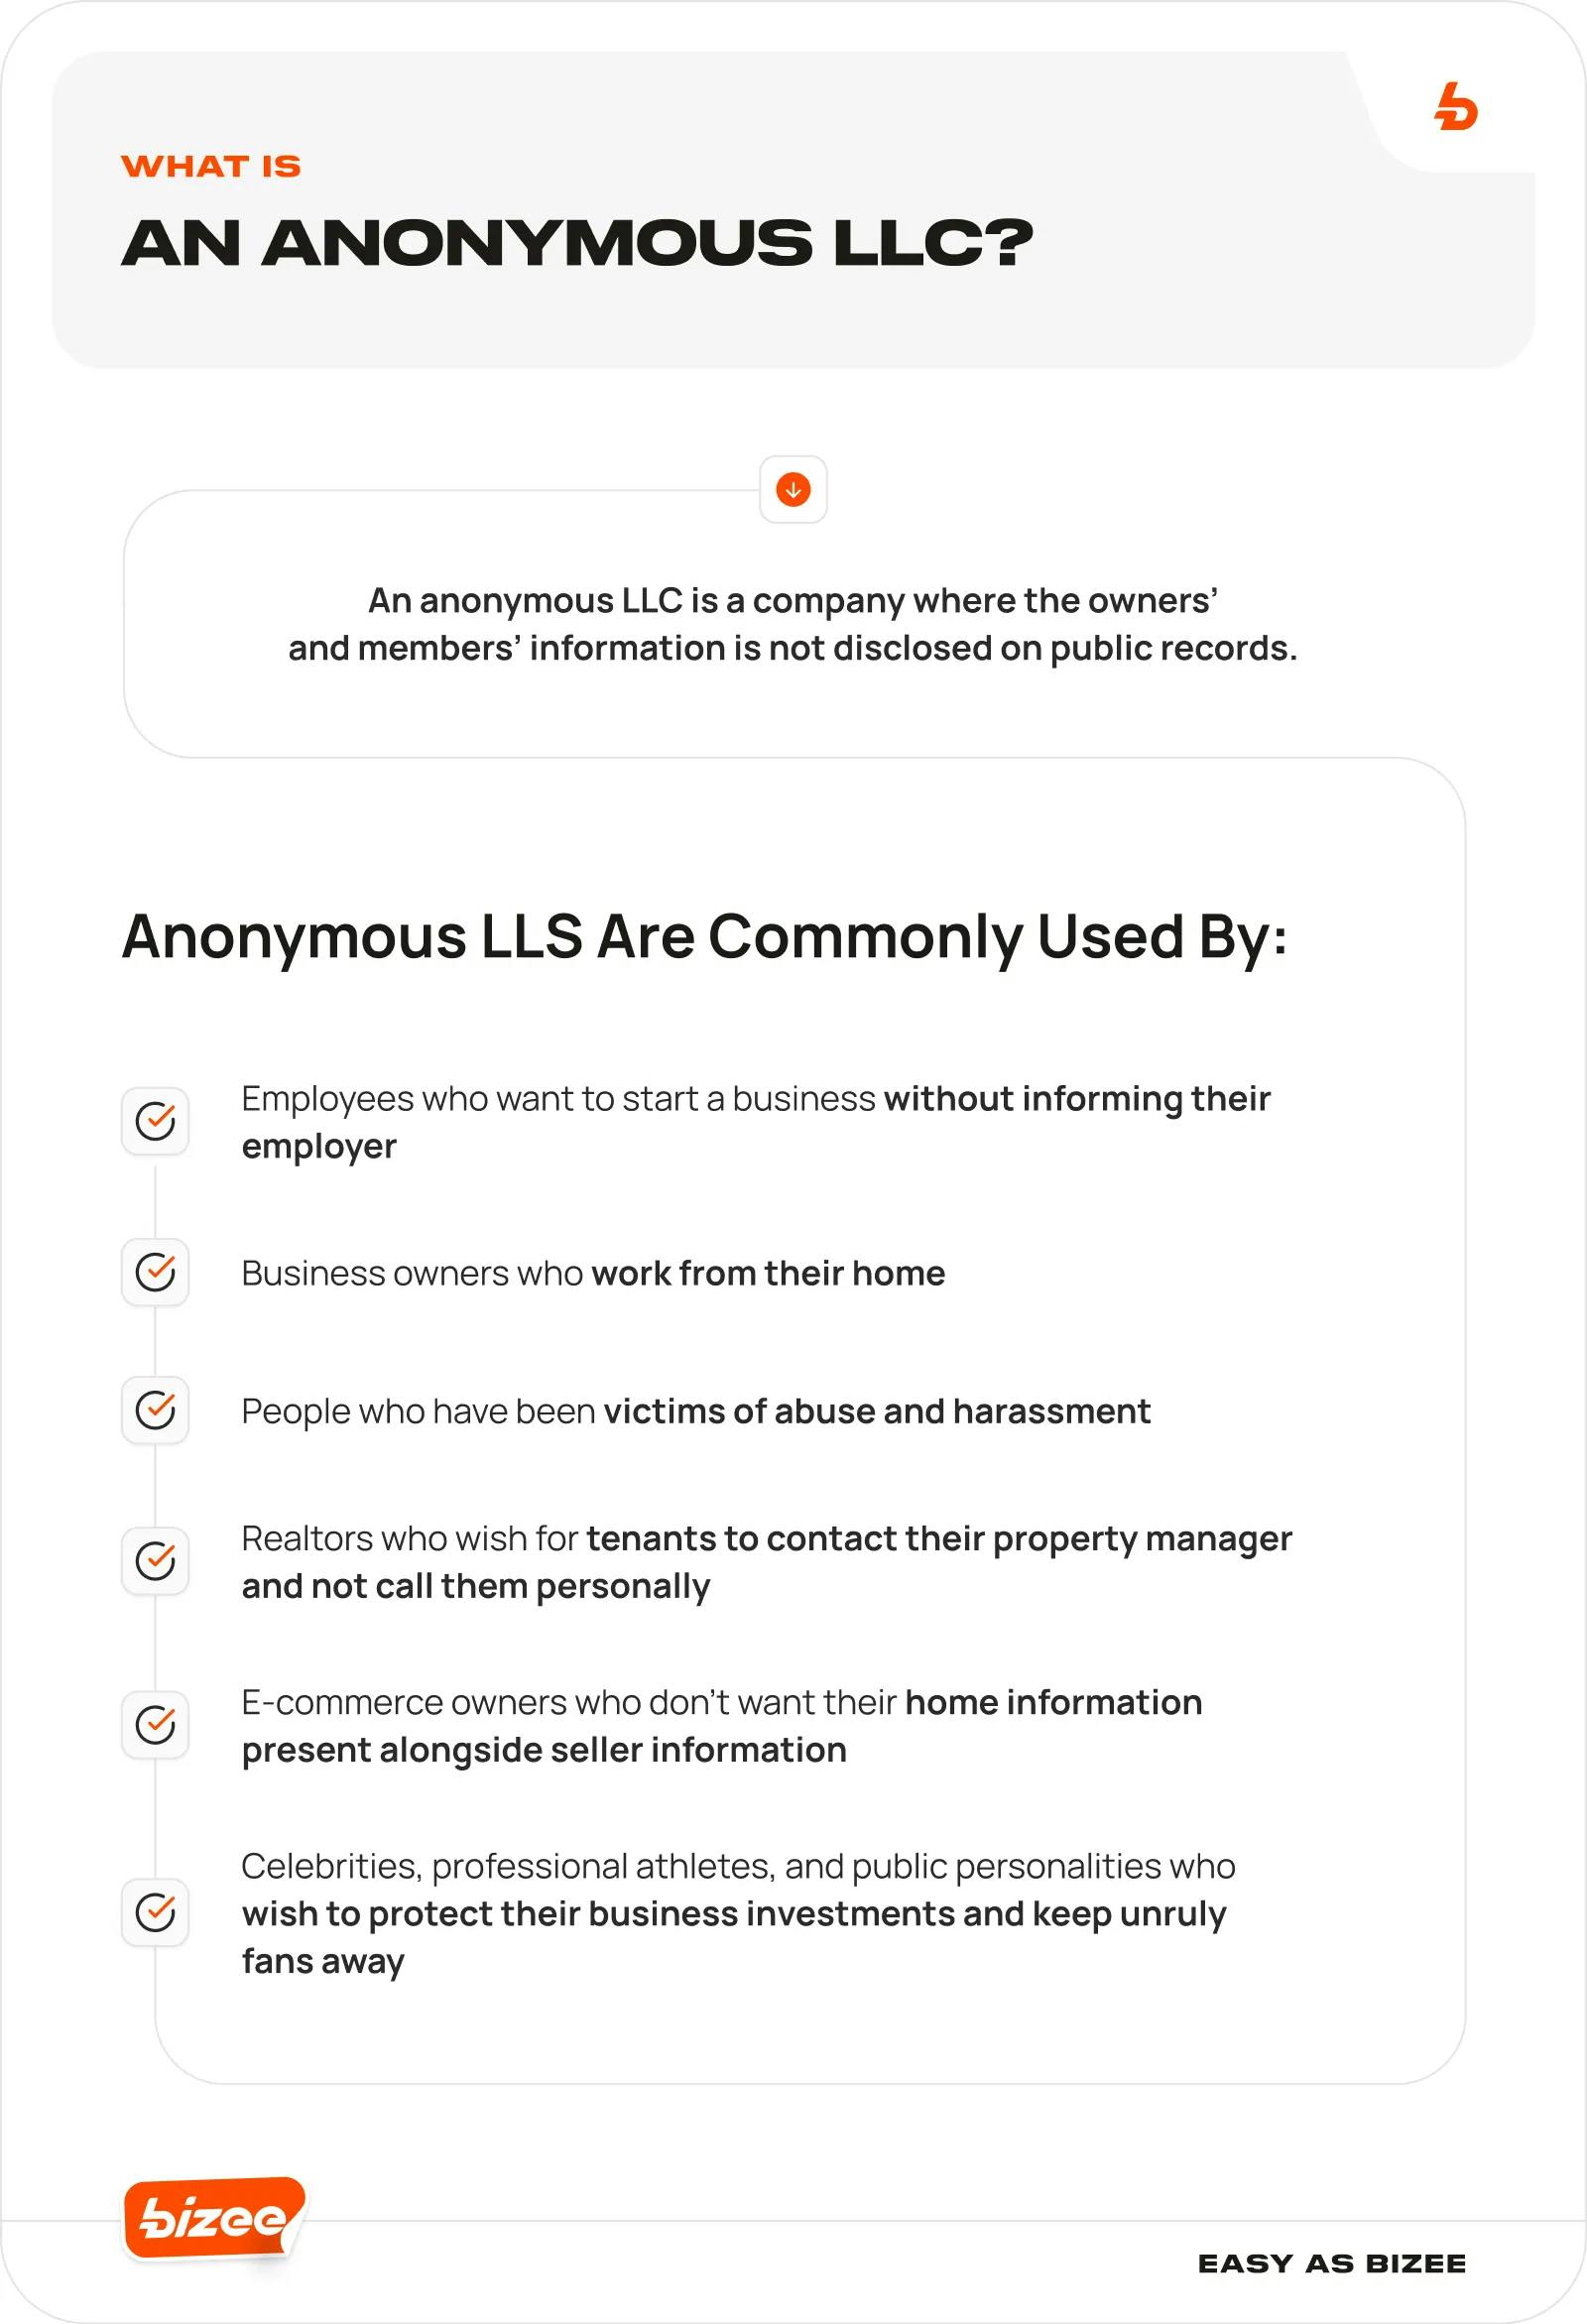 What Is an Anonymous LLC